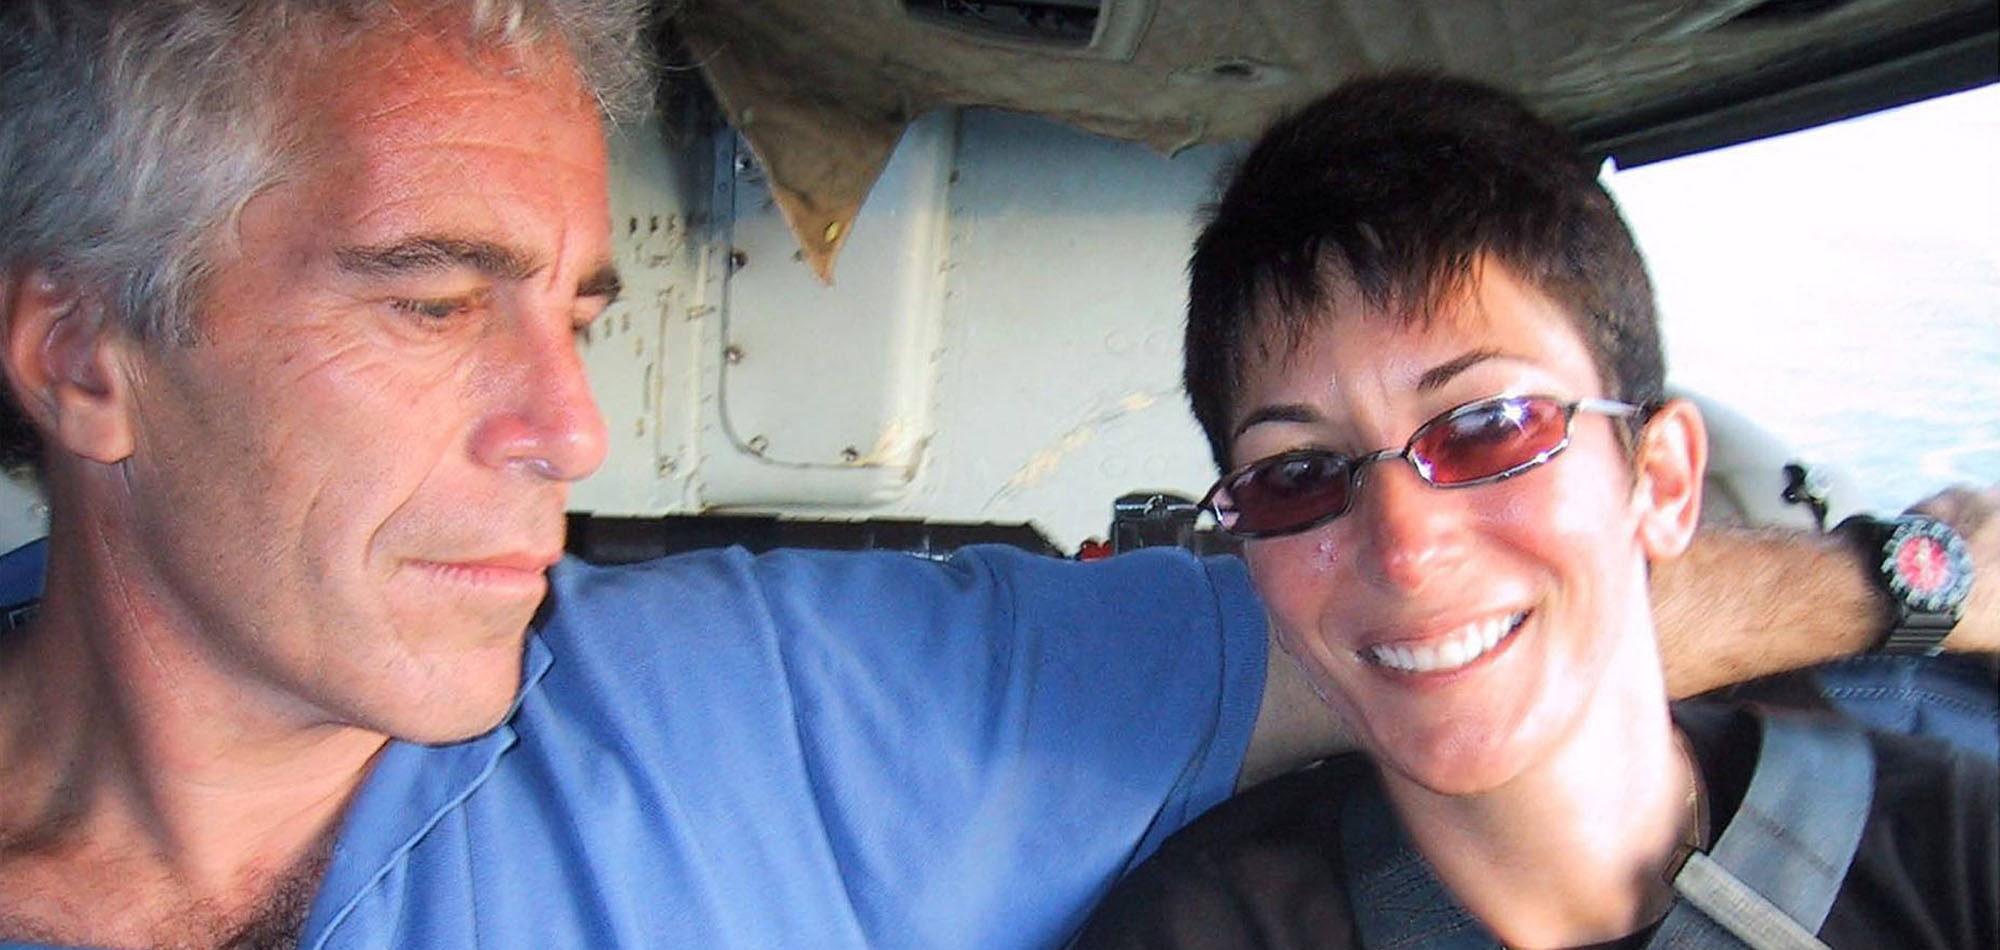 Ghislaine Maxwell Claims Victim Virginia Giuffre Received $100K For ‘False’ Jeffrey Epstein Stories